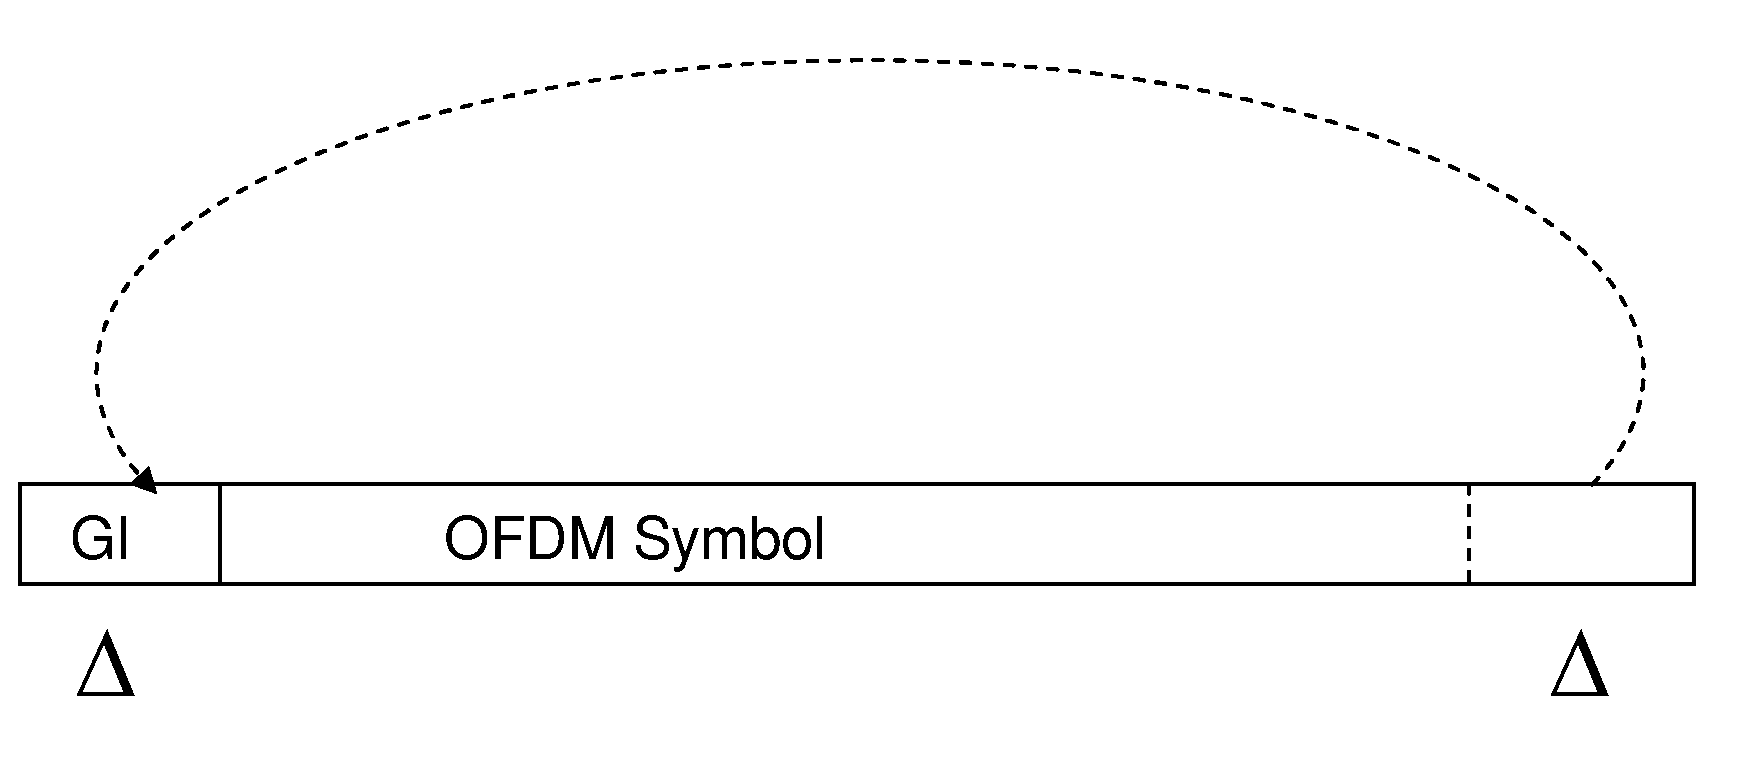 System and Methods for Receiving OFDM Symbols Having Timing and Frequency Offsets